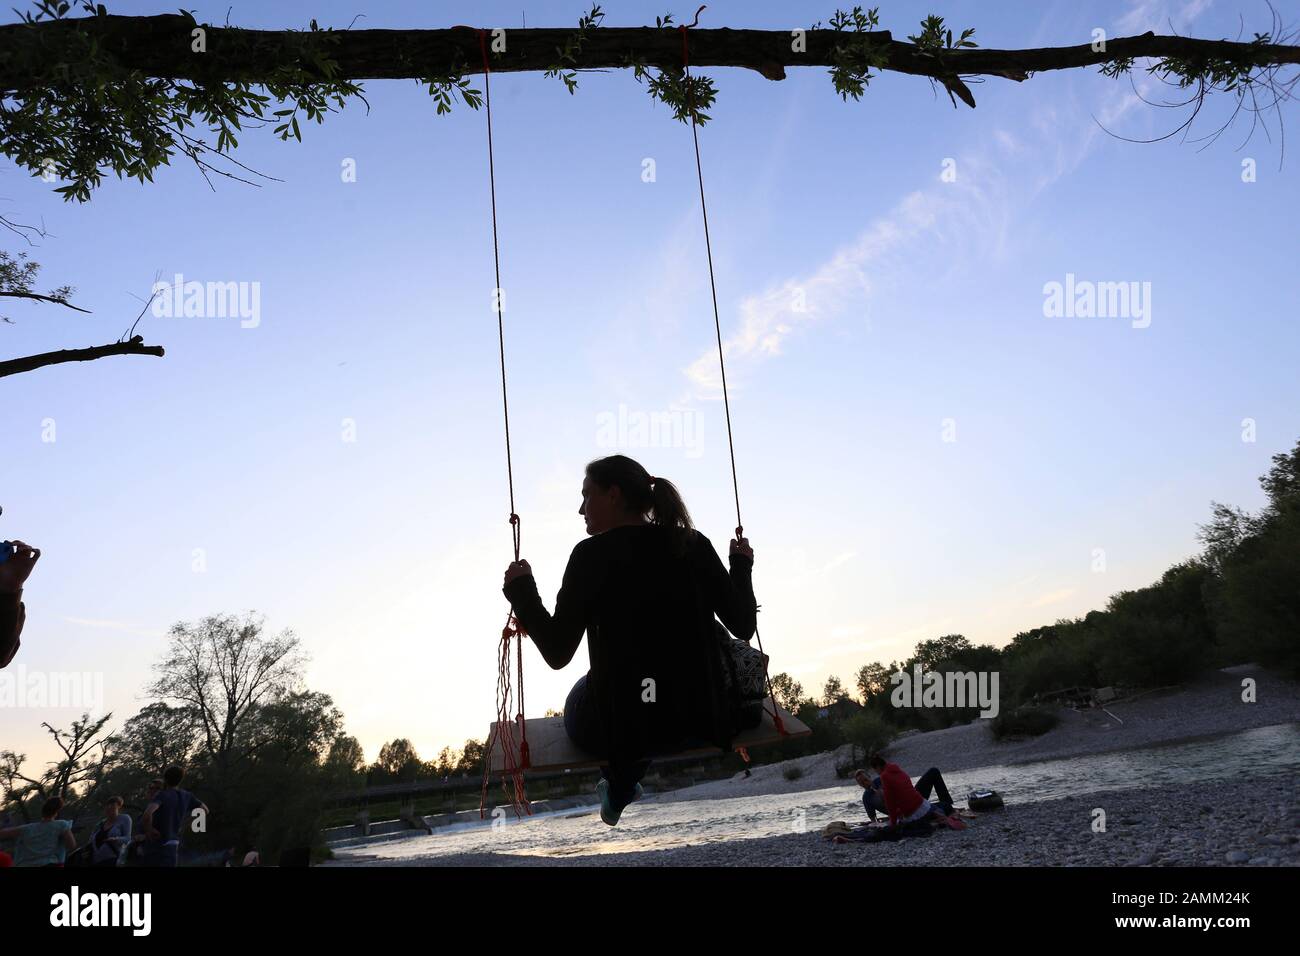 A woman swings in the evening hours at the Isar. A joker has carved the name 'Flaukel' on the improvised swing. [automated translation] Stock Photo